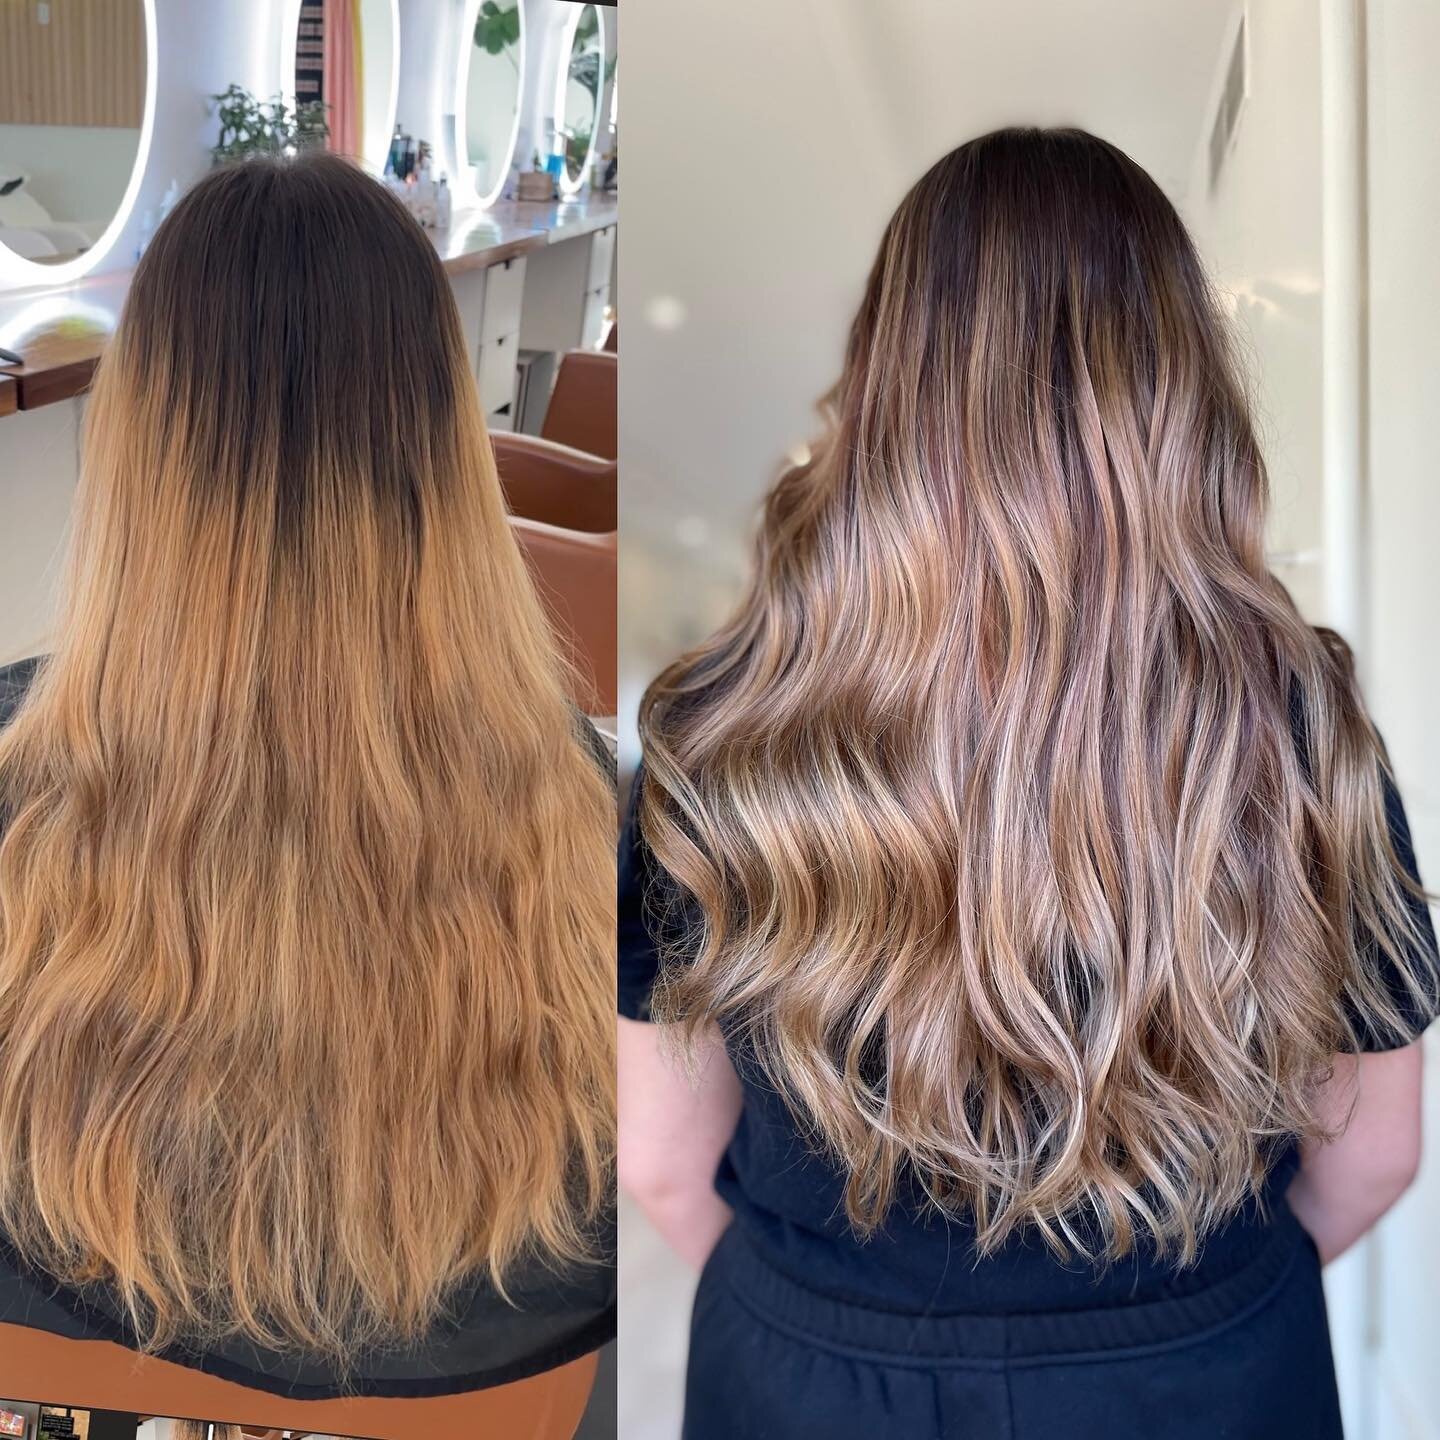 Transformation Friday? Sure why not for this amazing before and after by @itsgoldjen ✨

#staygold #kalamazoosalon #beforeandafter #kalamazoohairstylist #discoverkzoo #redkenshadeseq #goldwell #randco